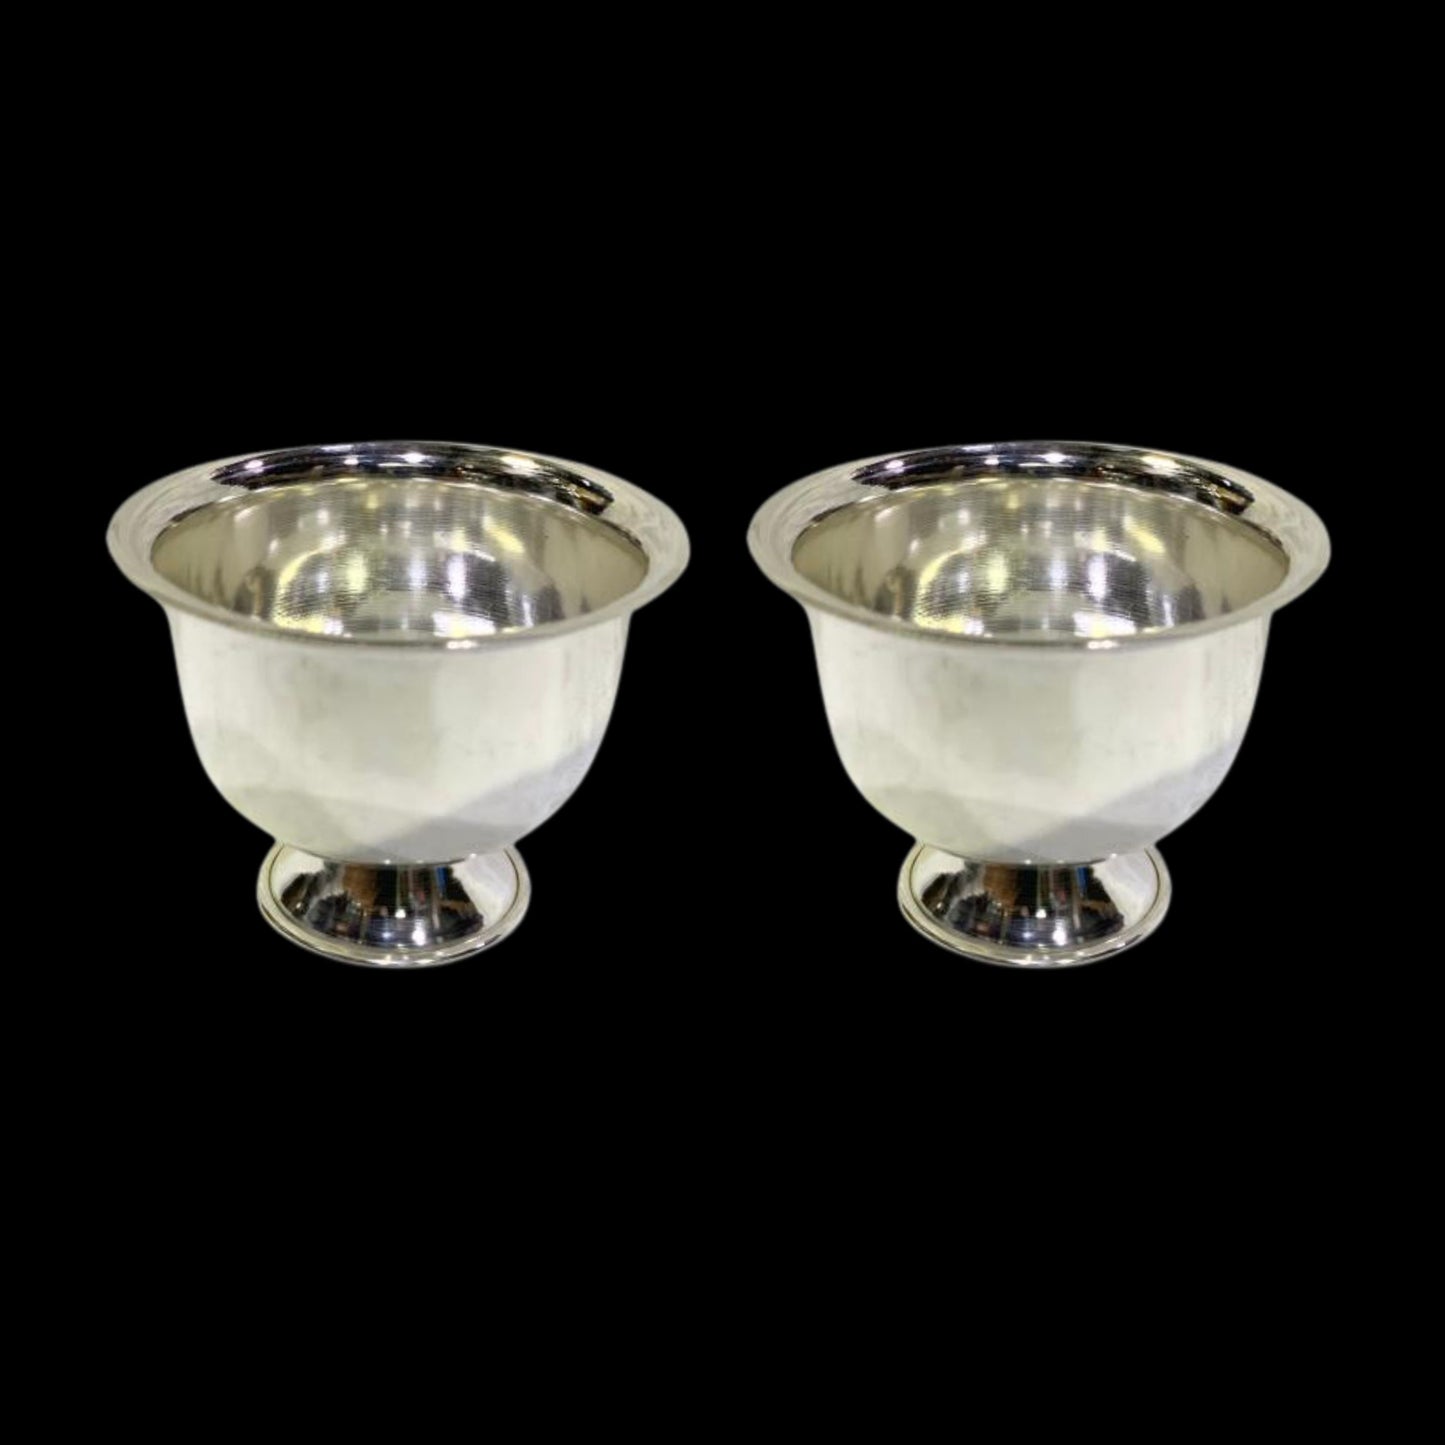 103 gms Pure Silver Padam Cups (Set Of 2) - Mirror Finished BIS Hallmarked